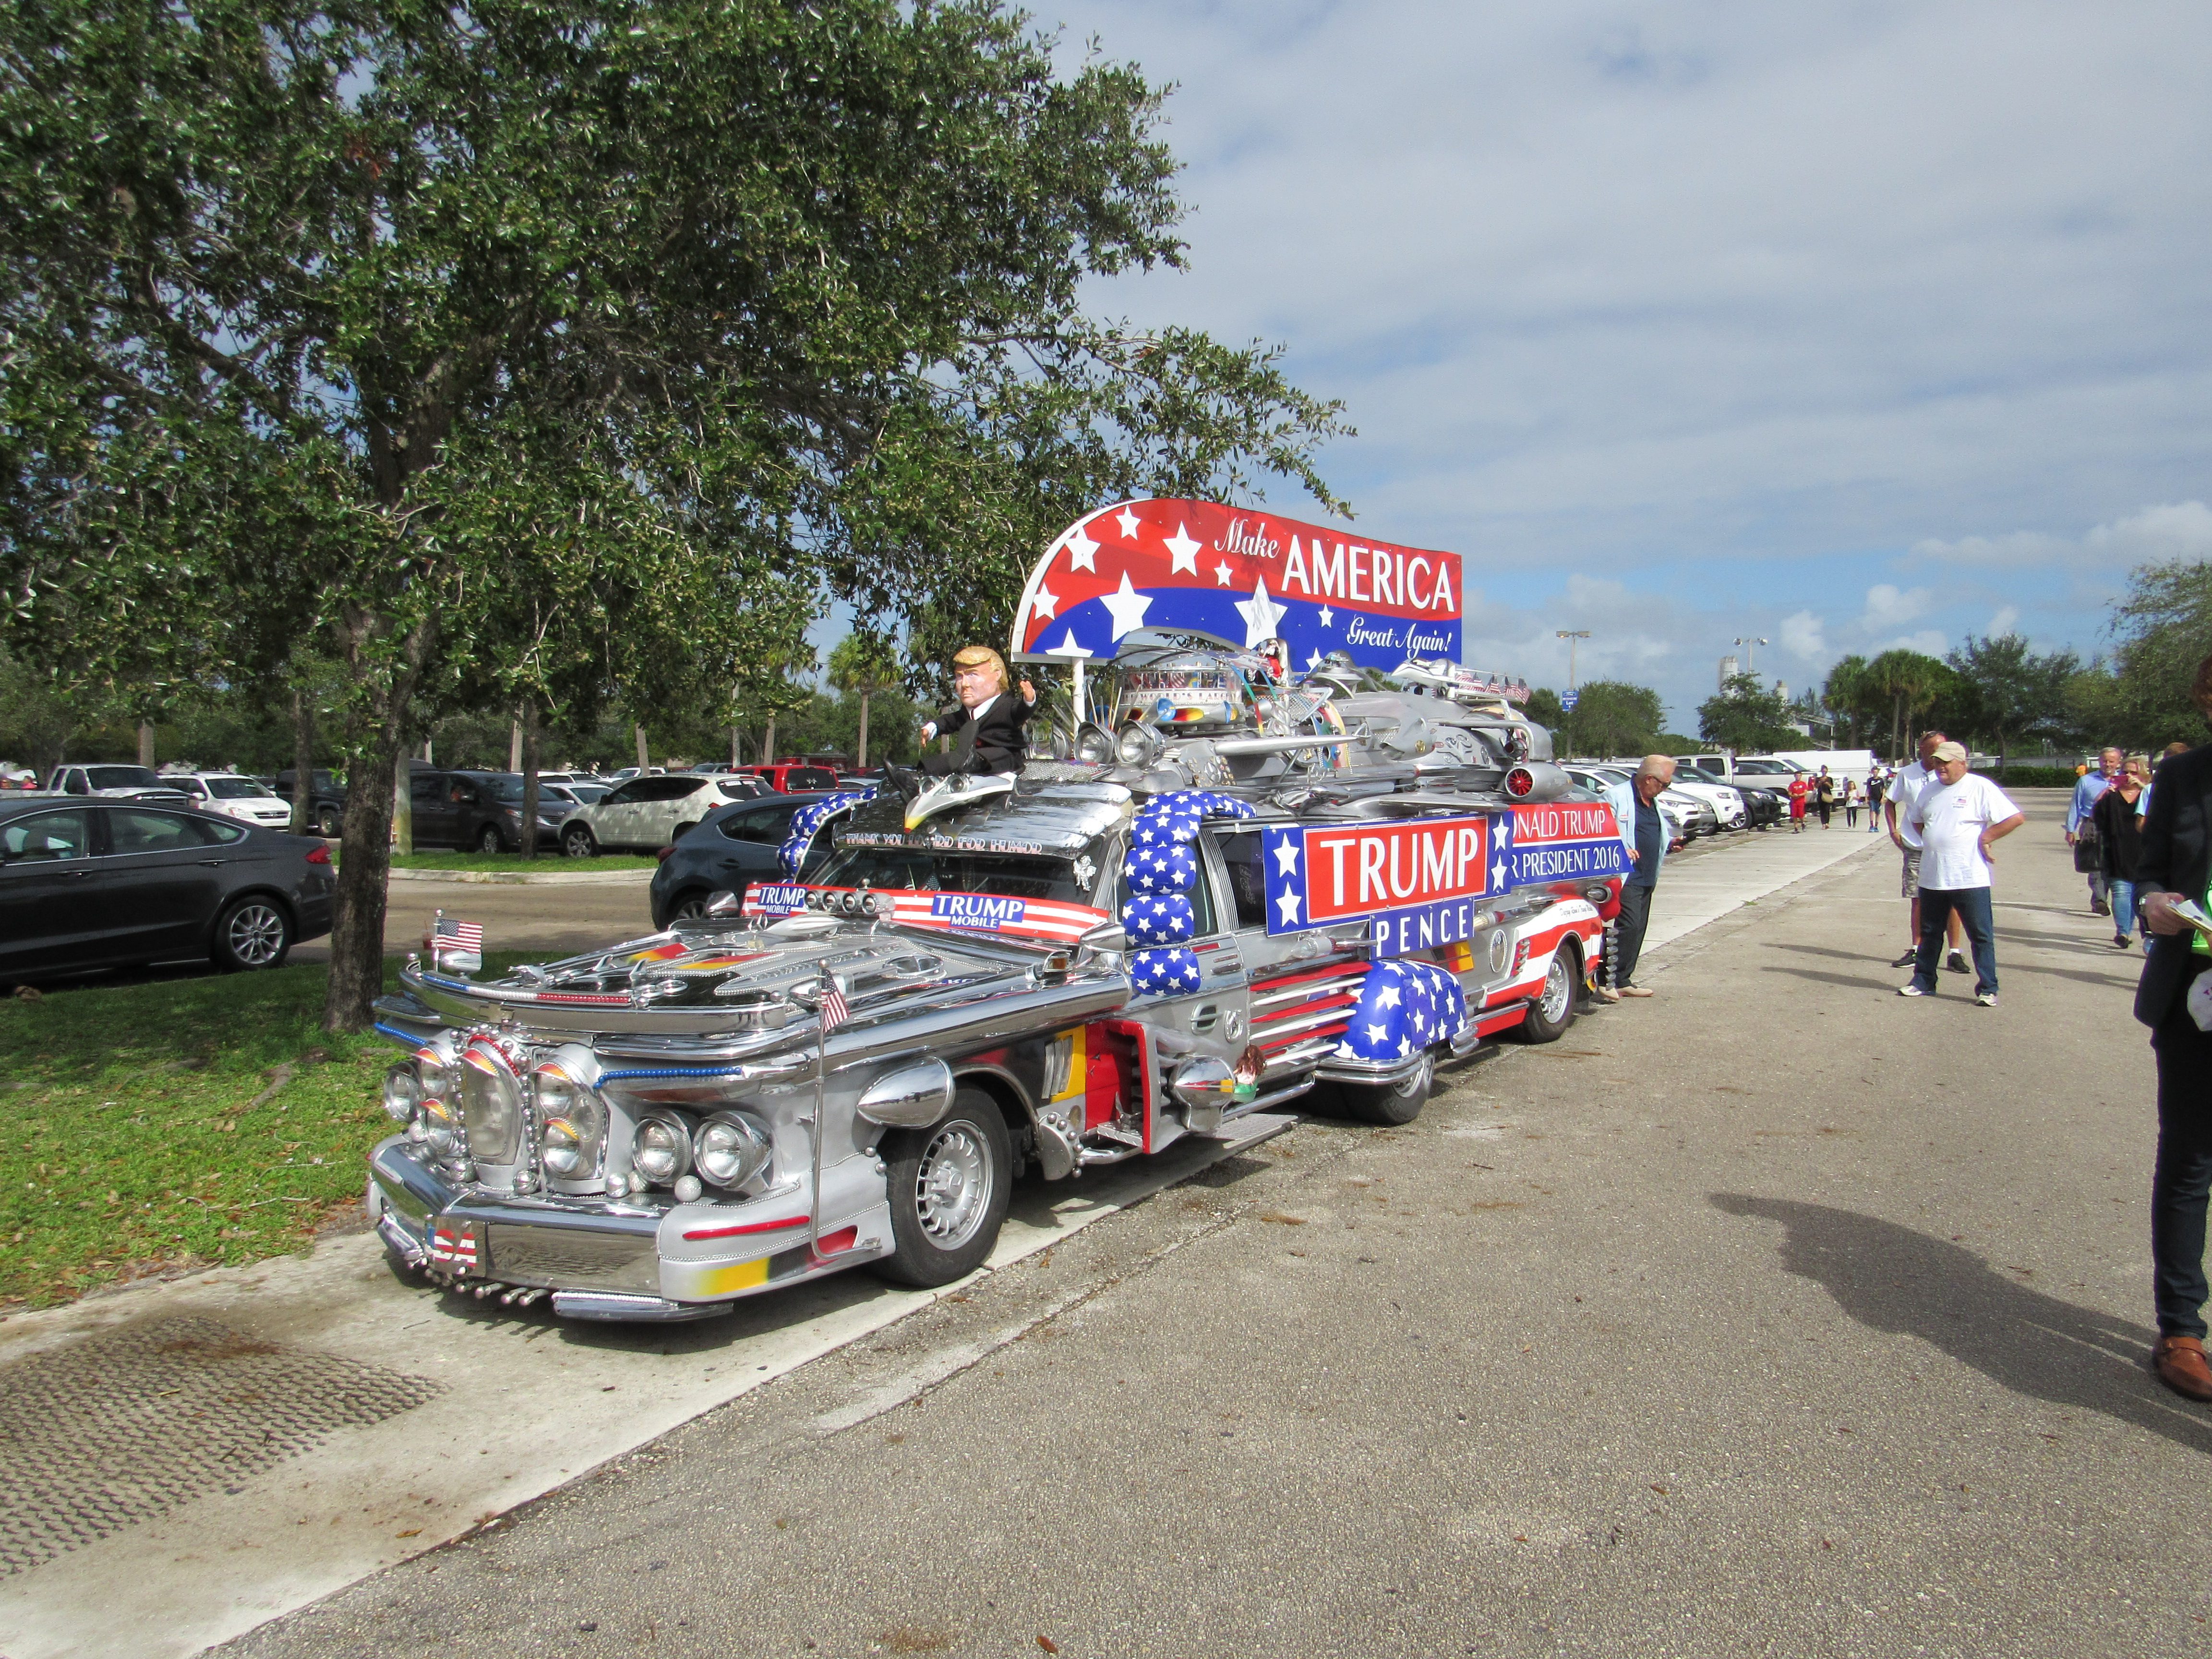 Trump mobile front view West Palm Beach rally